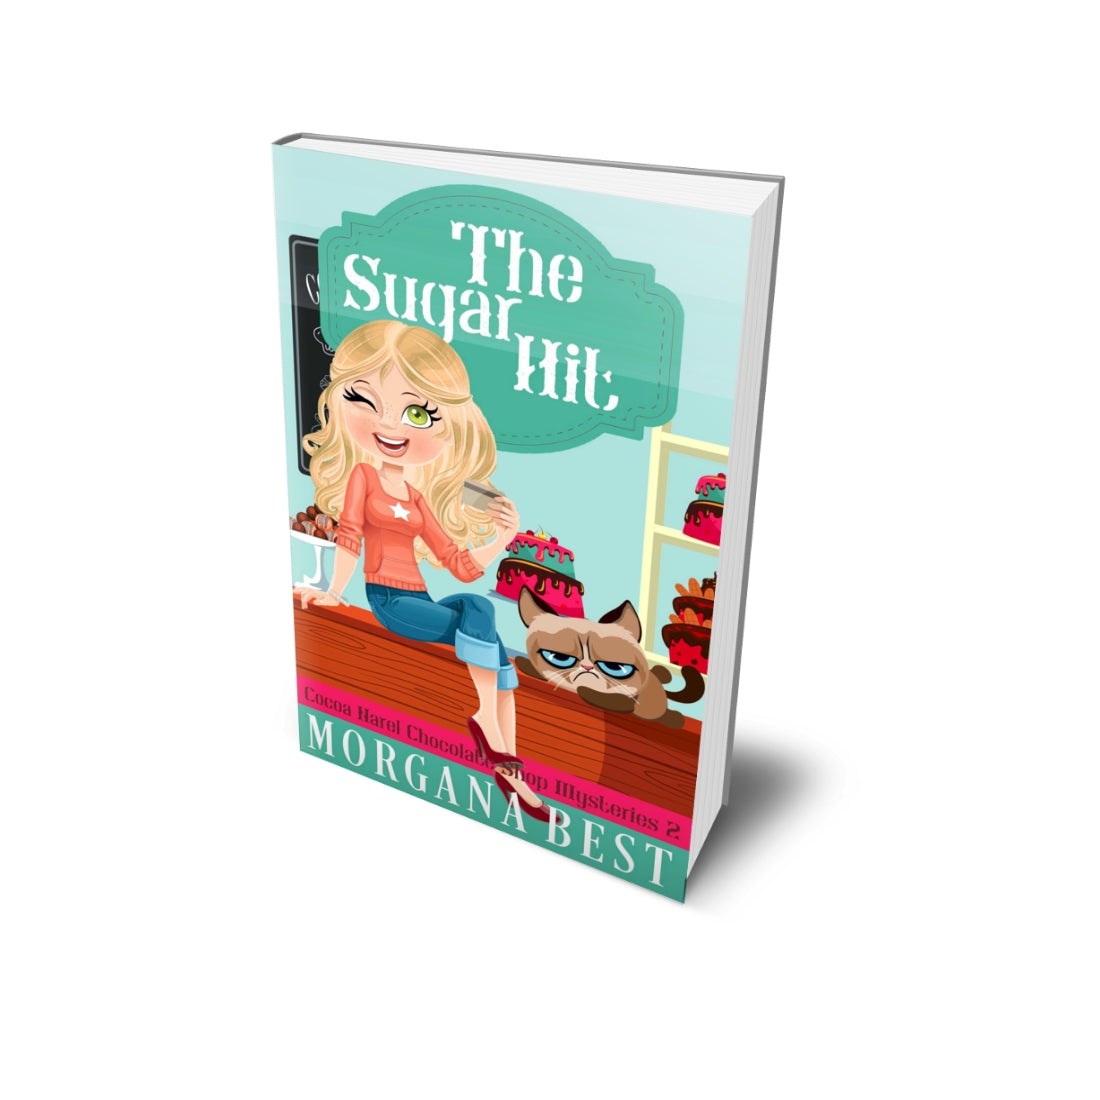 The Sugar Hit PAPERBACK cozy mystery morgana best